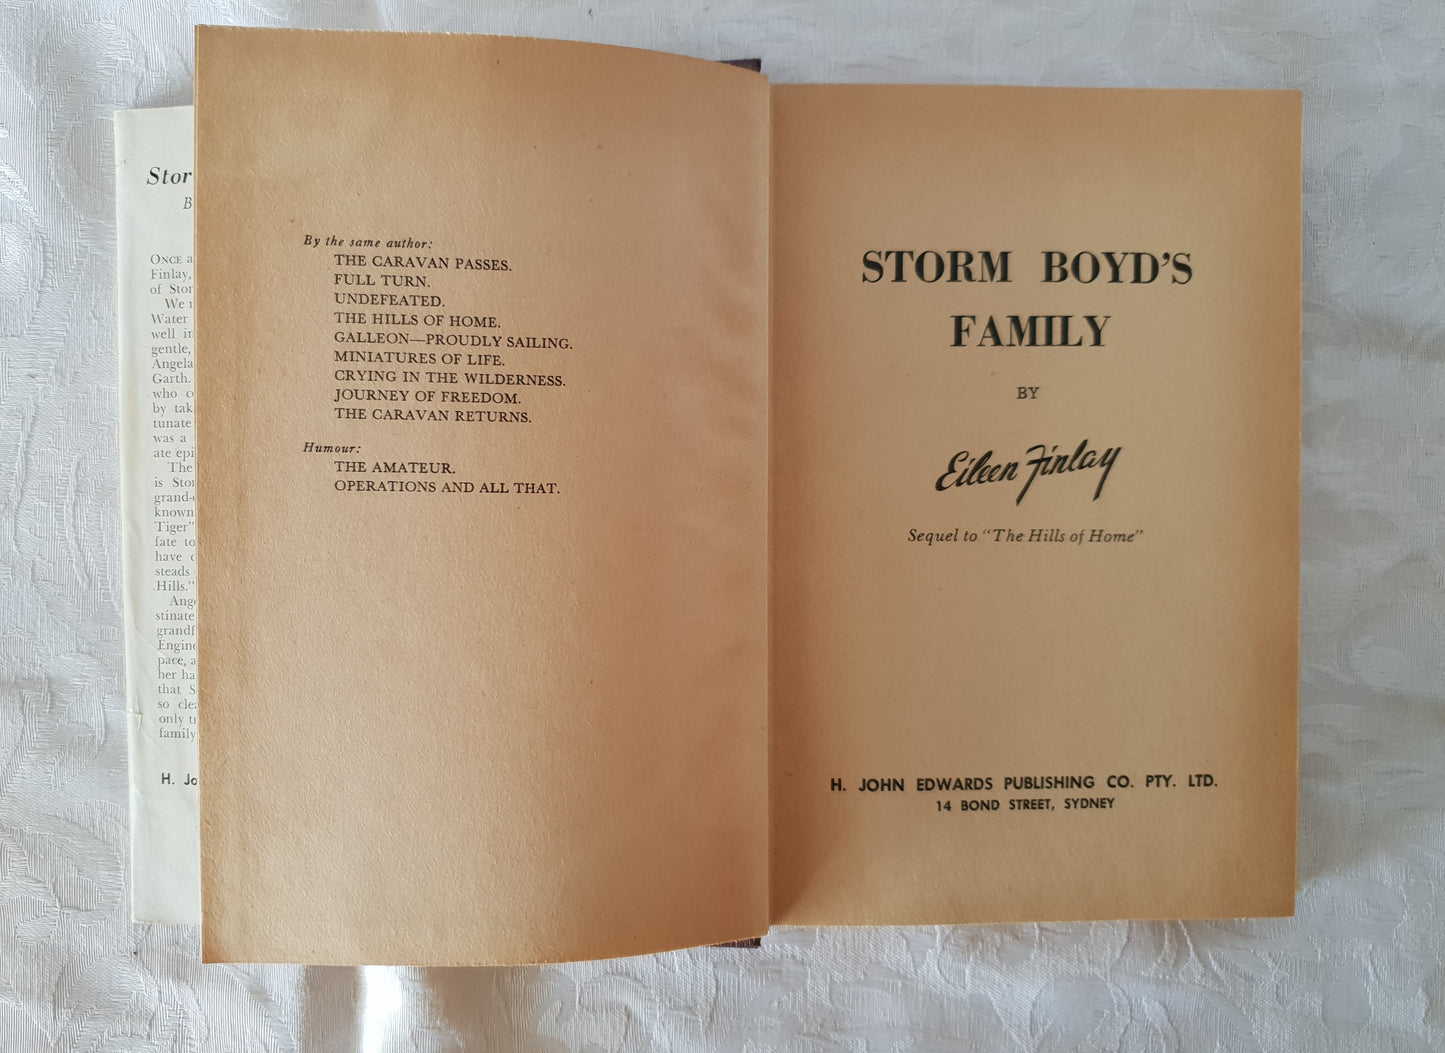 Storm Boyd's Family by Eileen Finlay